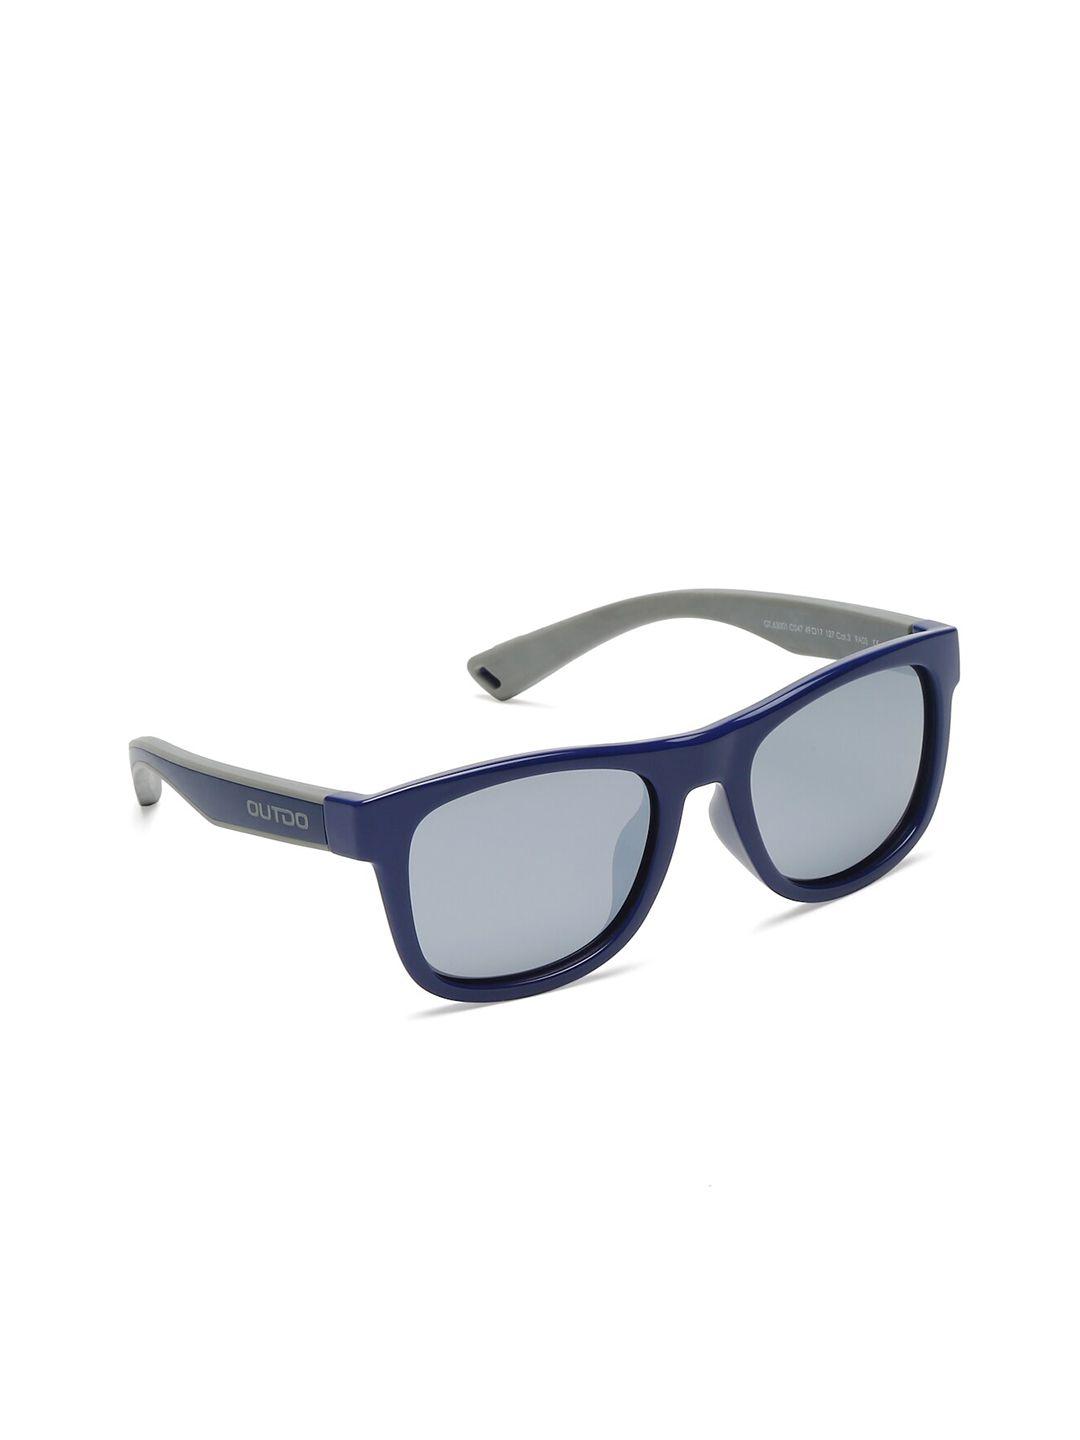 sunnies unisex grey lens & purple square sunglasses with polarised and uv protected lens